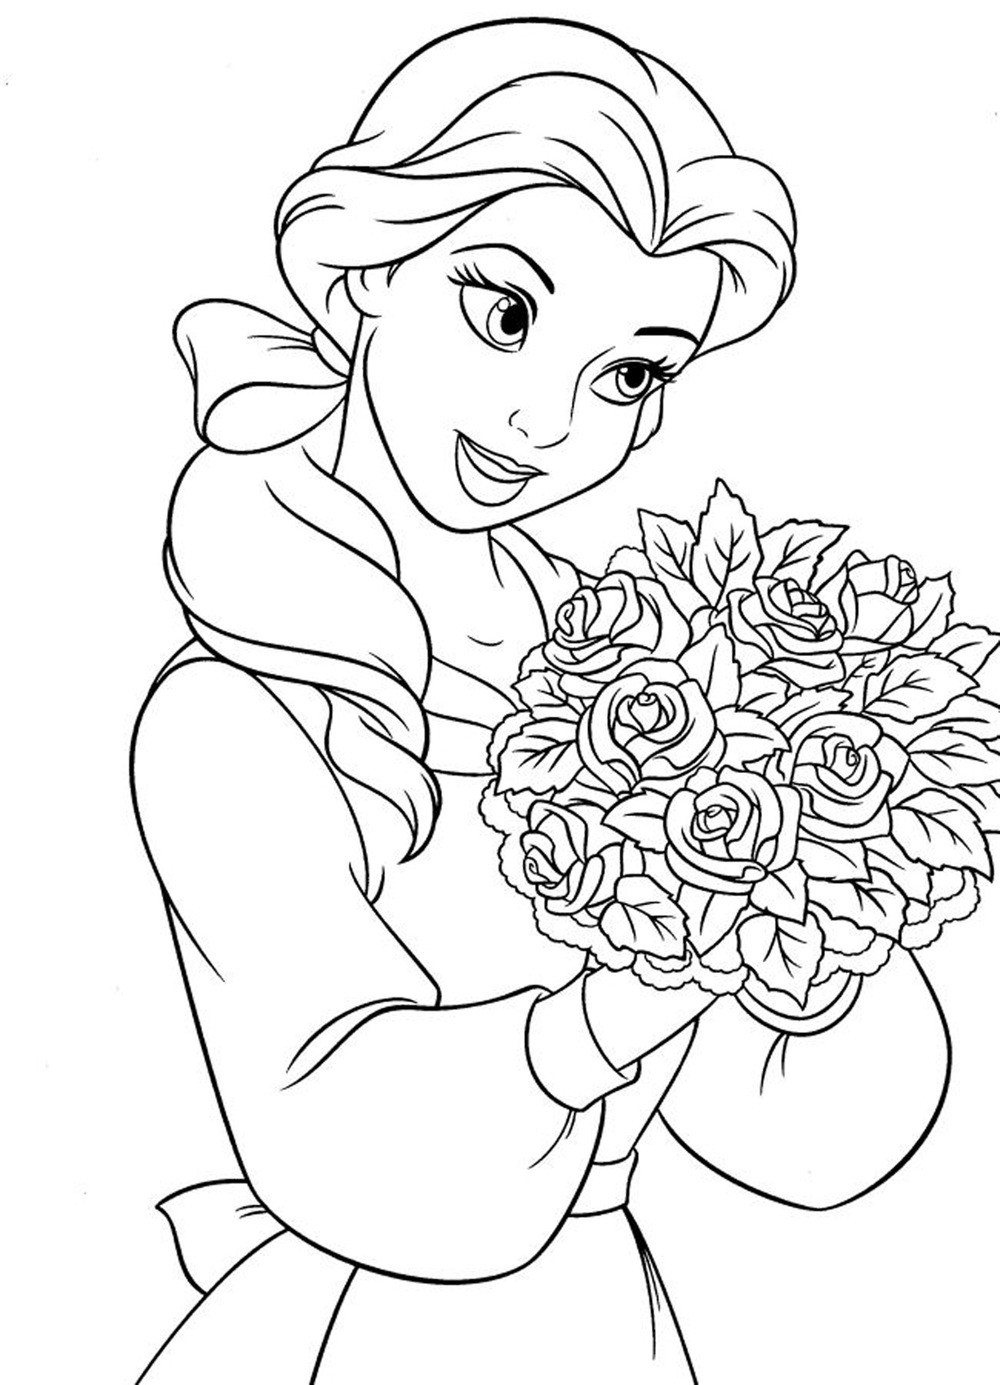 Coloring Pages For Girls Disney Princess
 Free Printable Disney Princess Coloring Pages For Kids